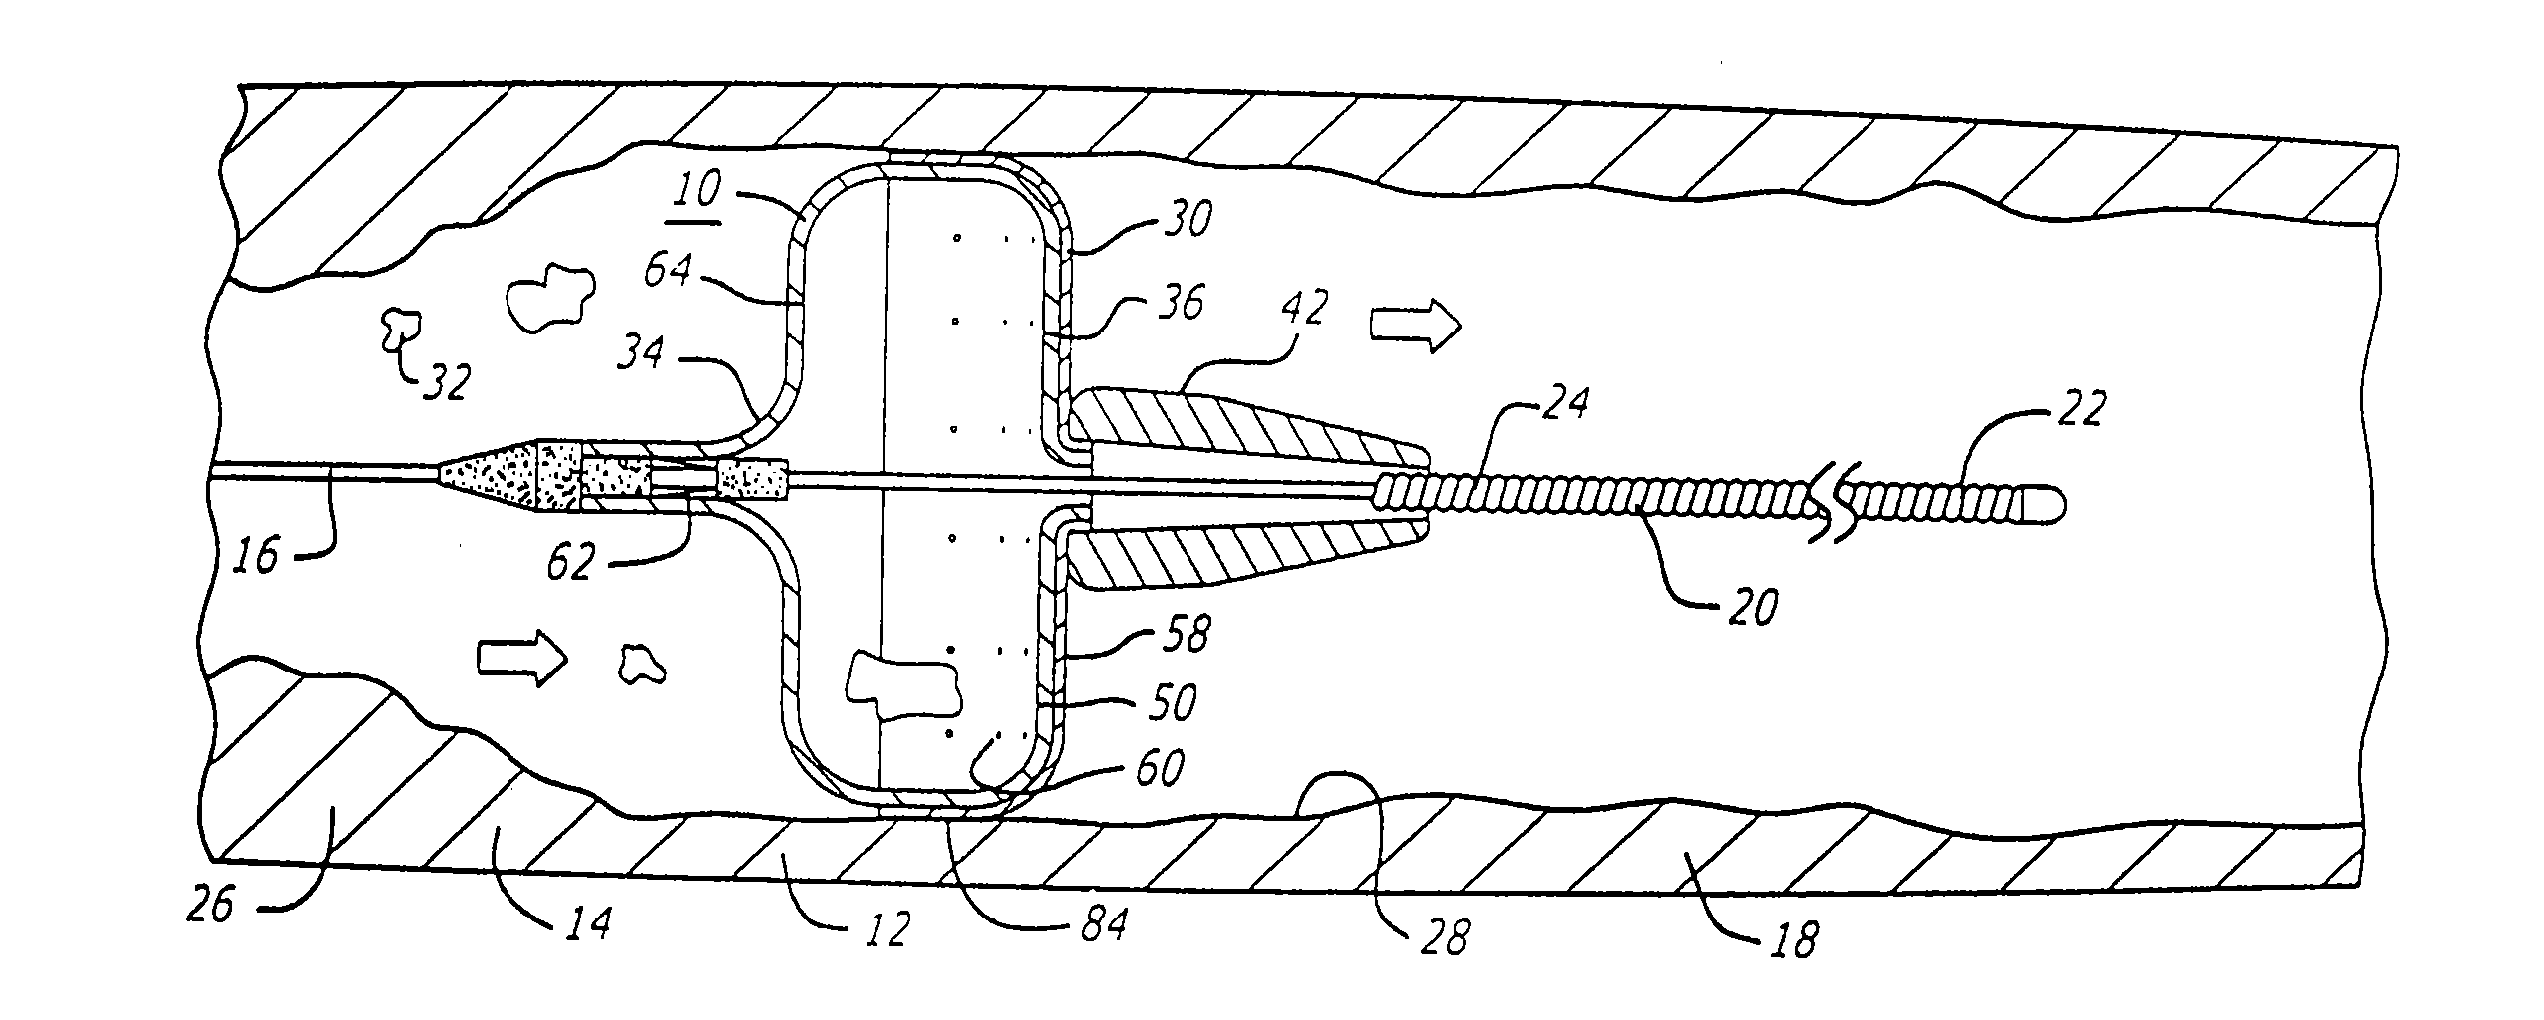 Filter device for embolic protection systems